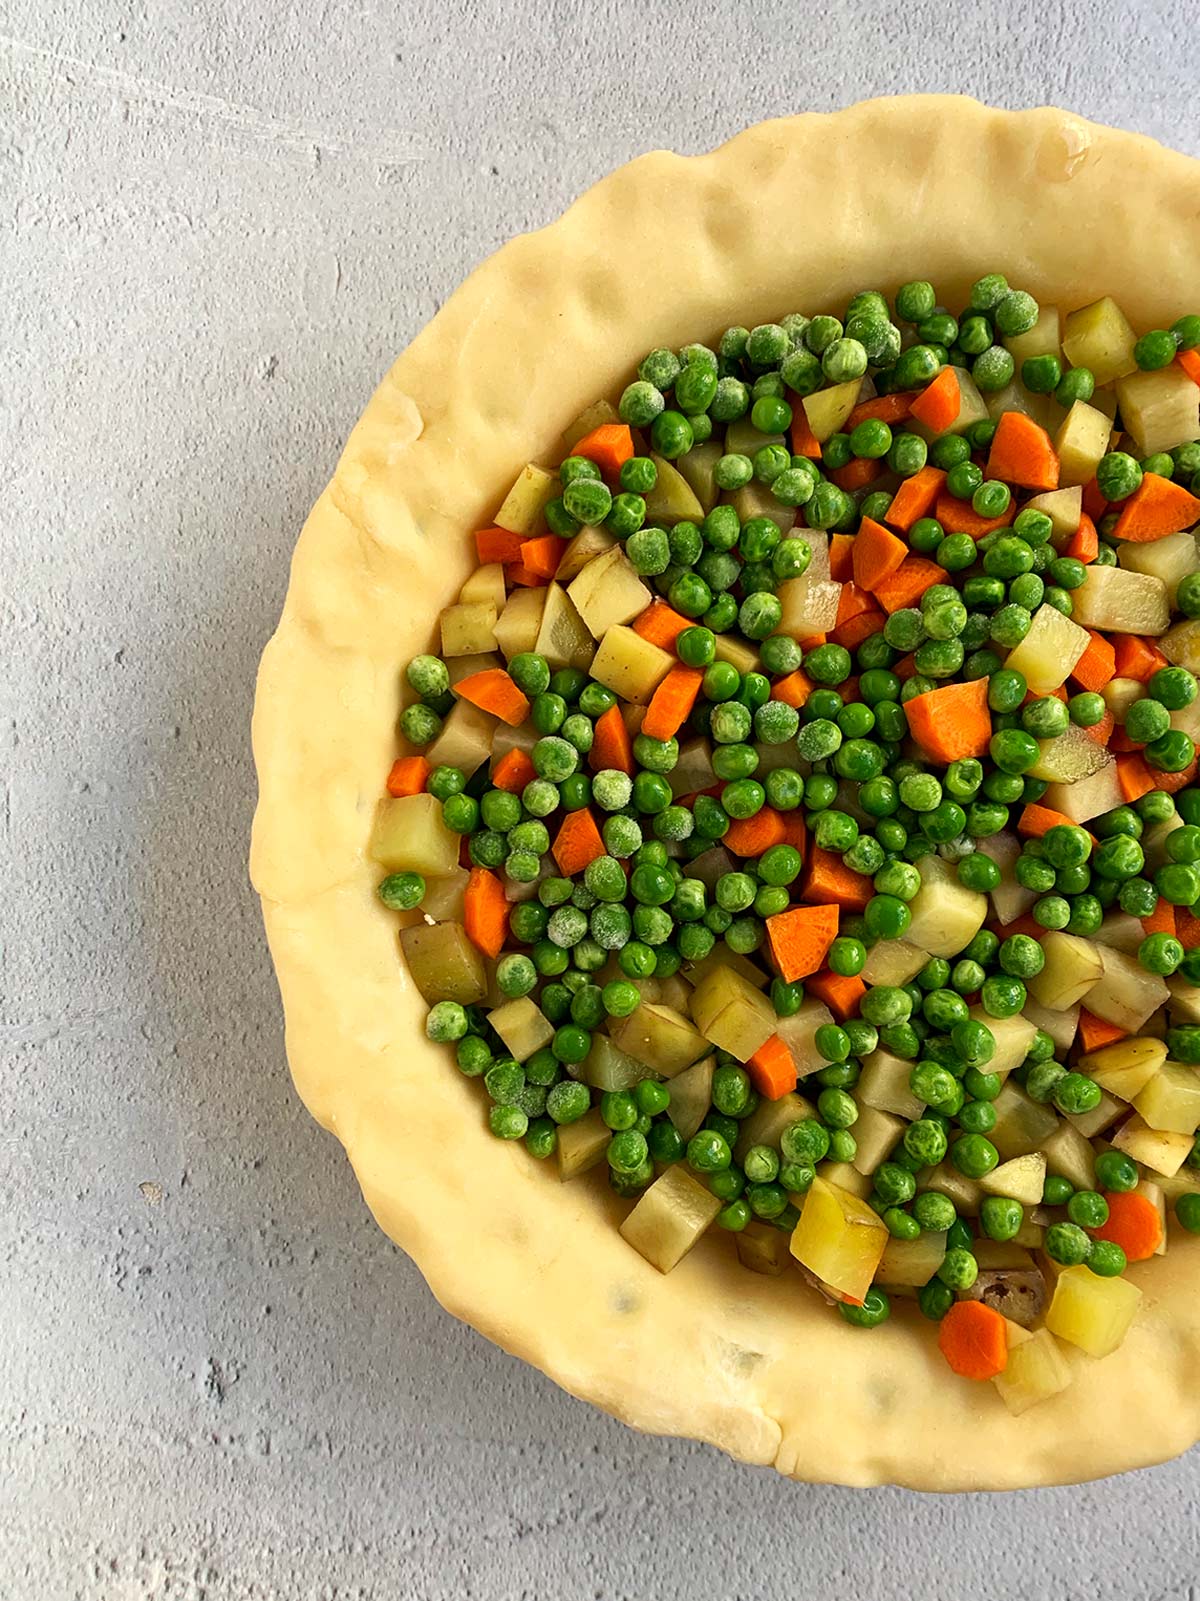 Vegetables and chicken in pie pan before adding top crust.